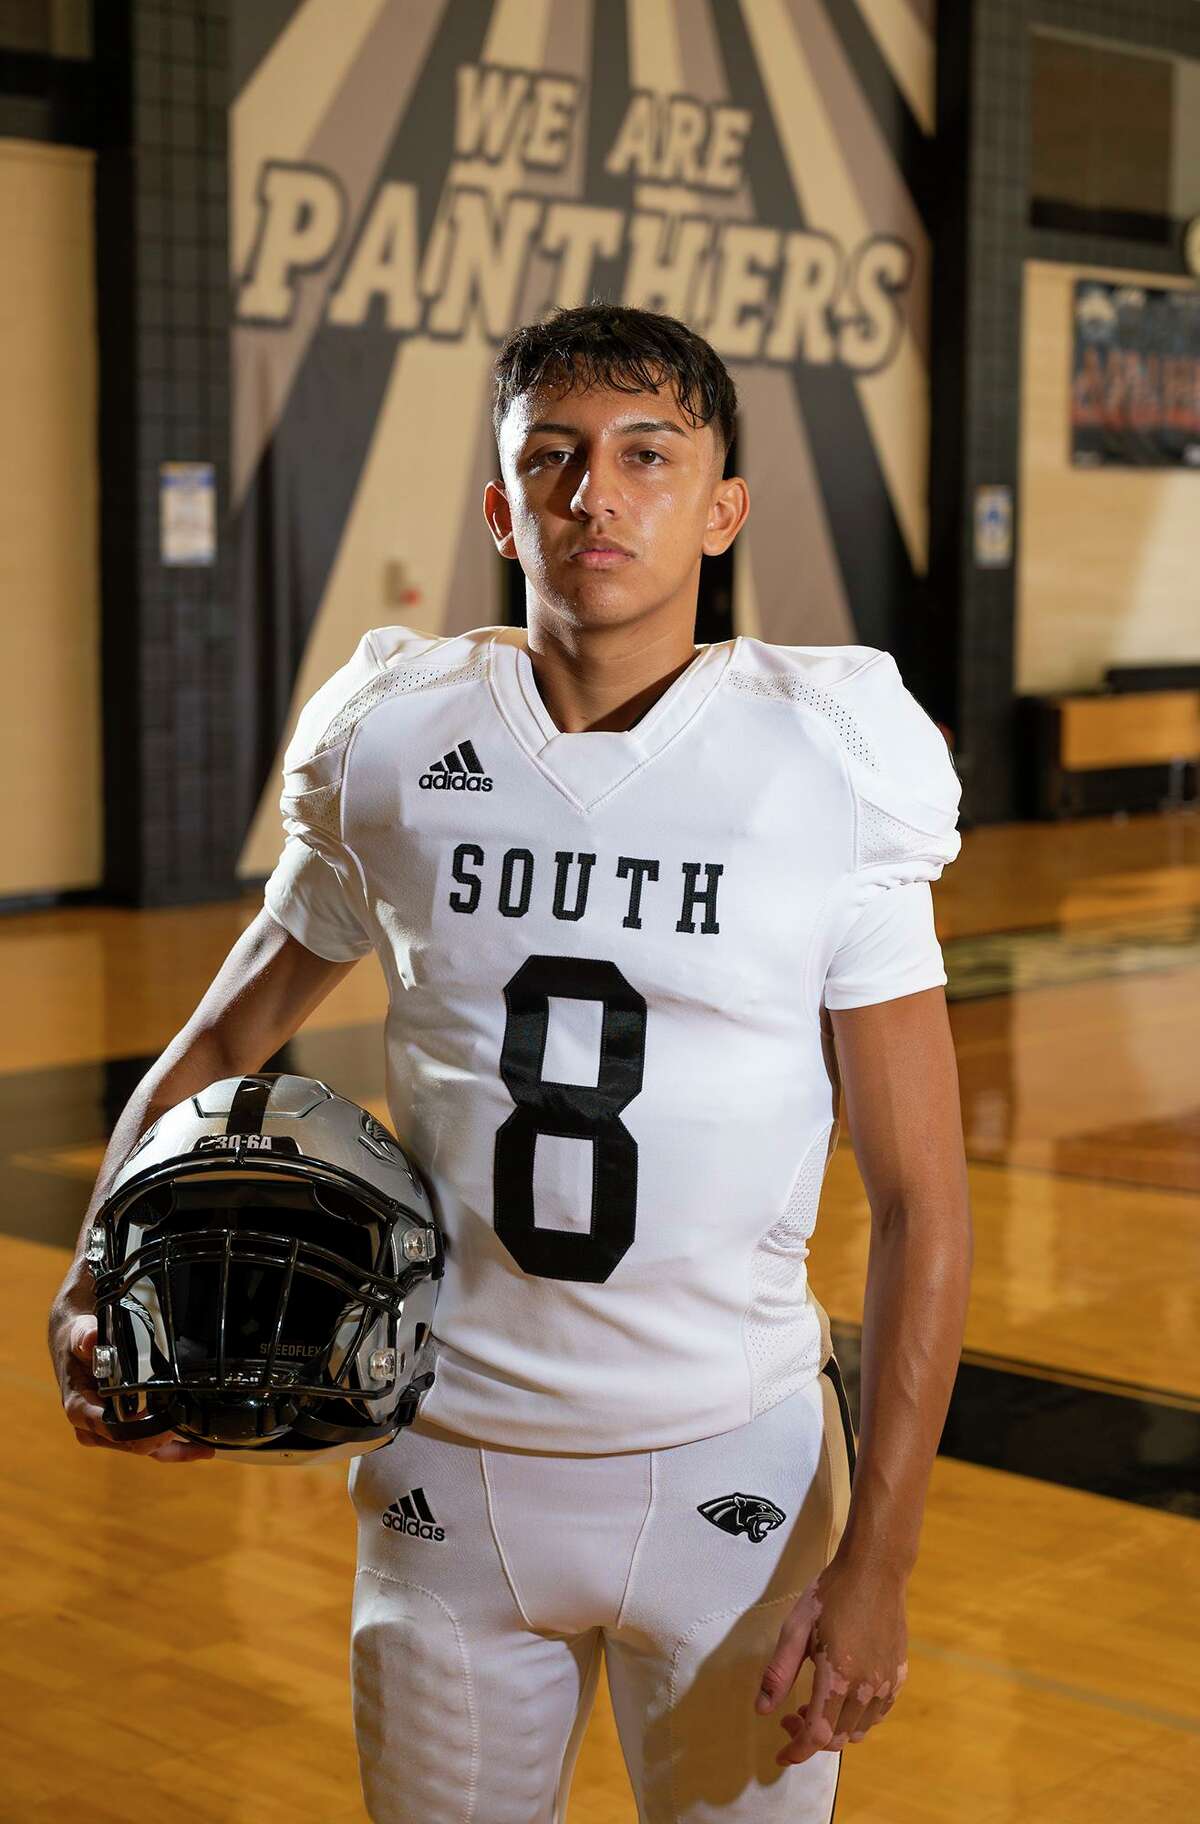 United South sophomore Luis Cisneros was named the starting quarterback after not making the team in his freshman season.